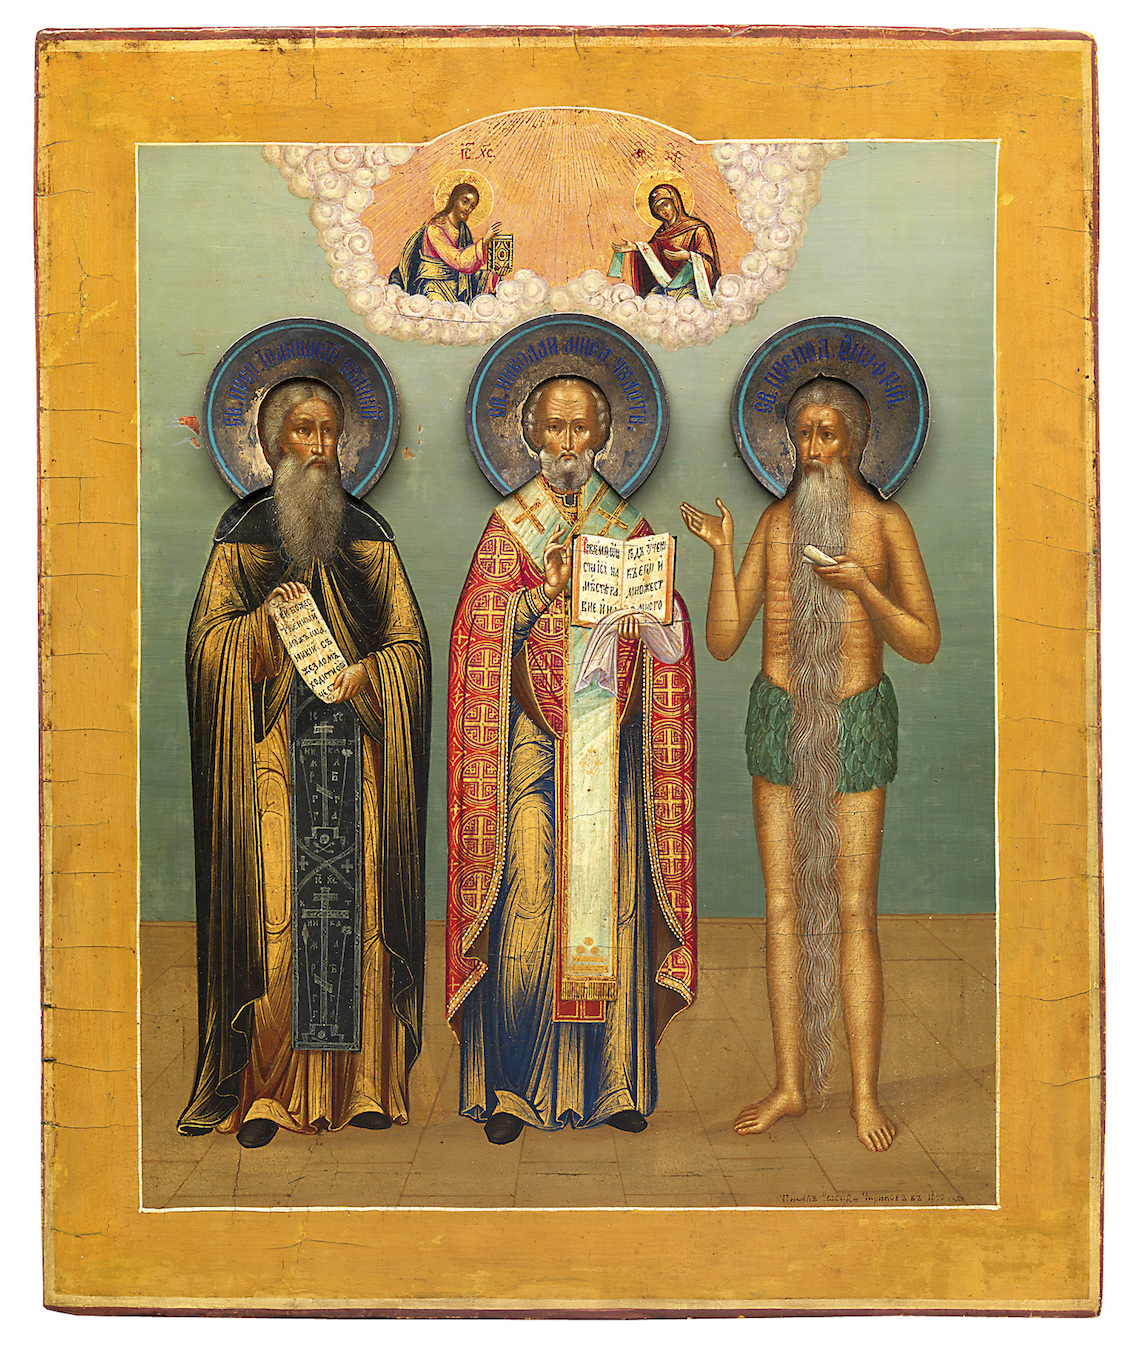 A Fine Russan Icon of St Nicholas the Miracle Worker, Ioannikiy and Onufriy the Great with Silver and Enamel Haloes